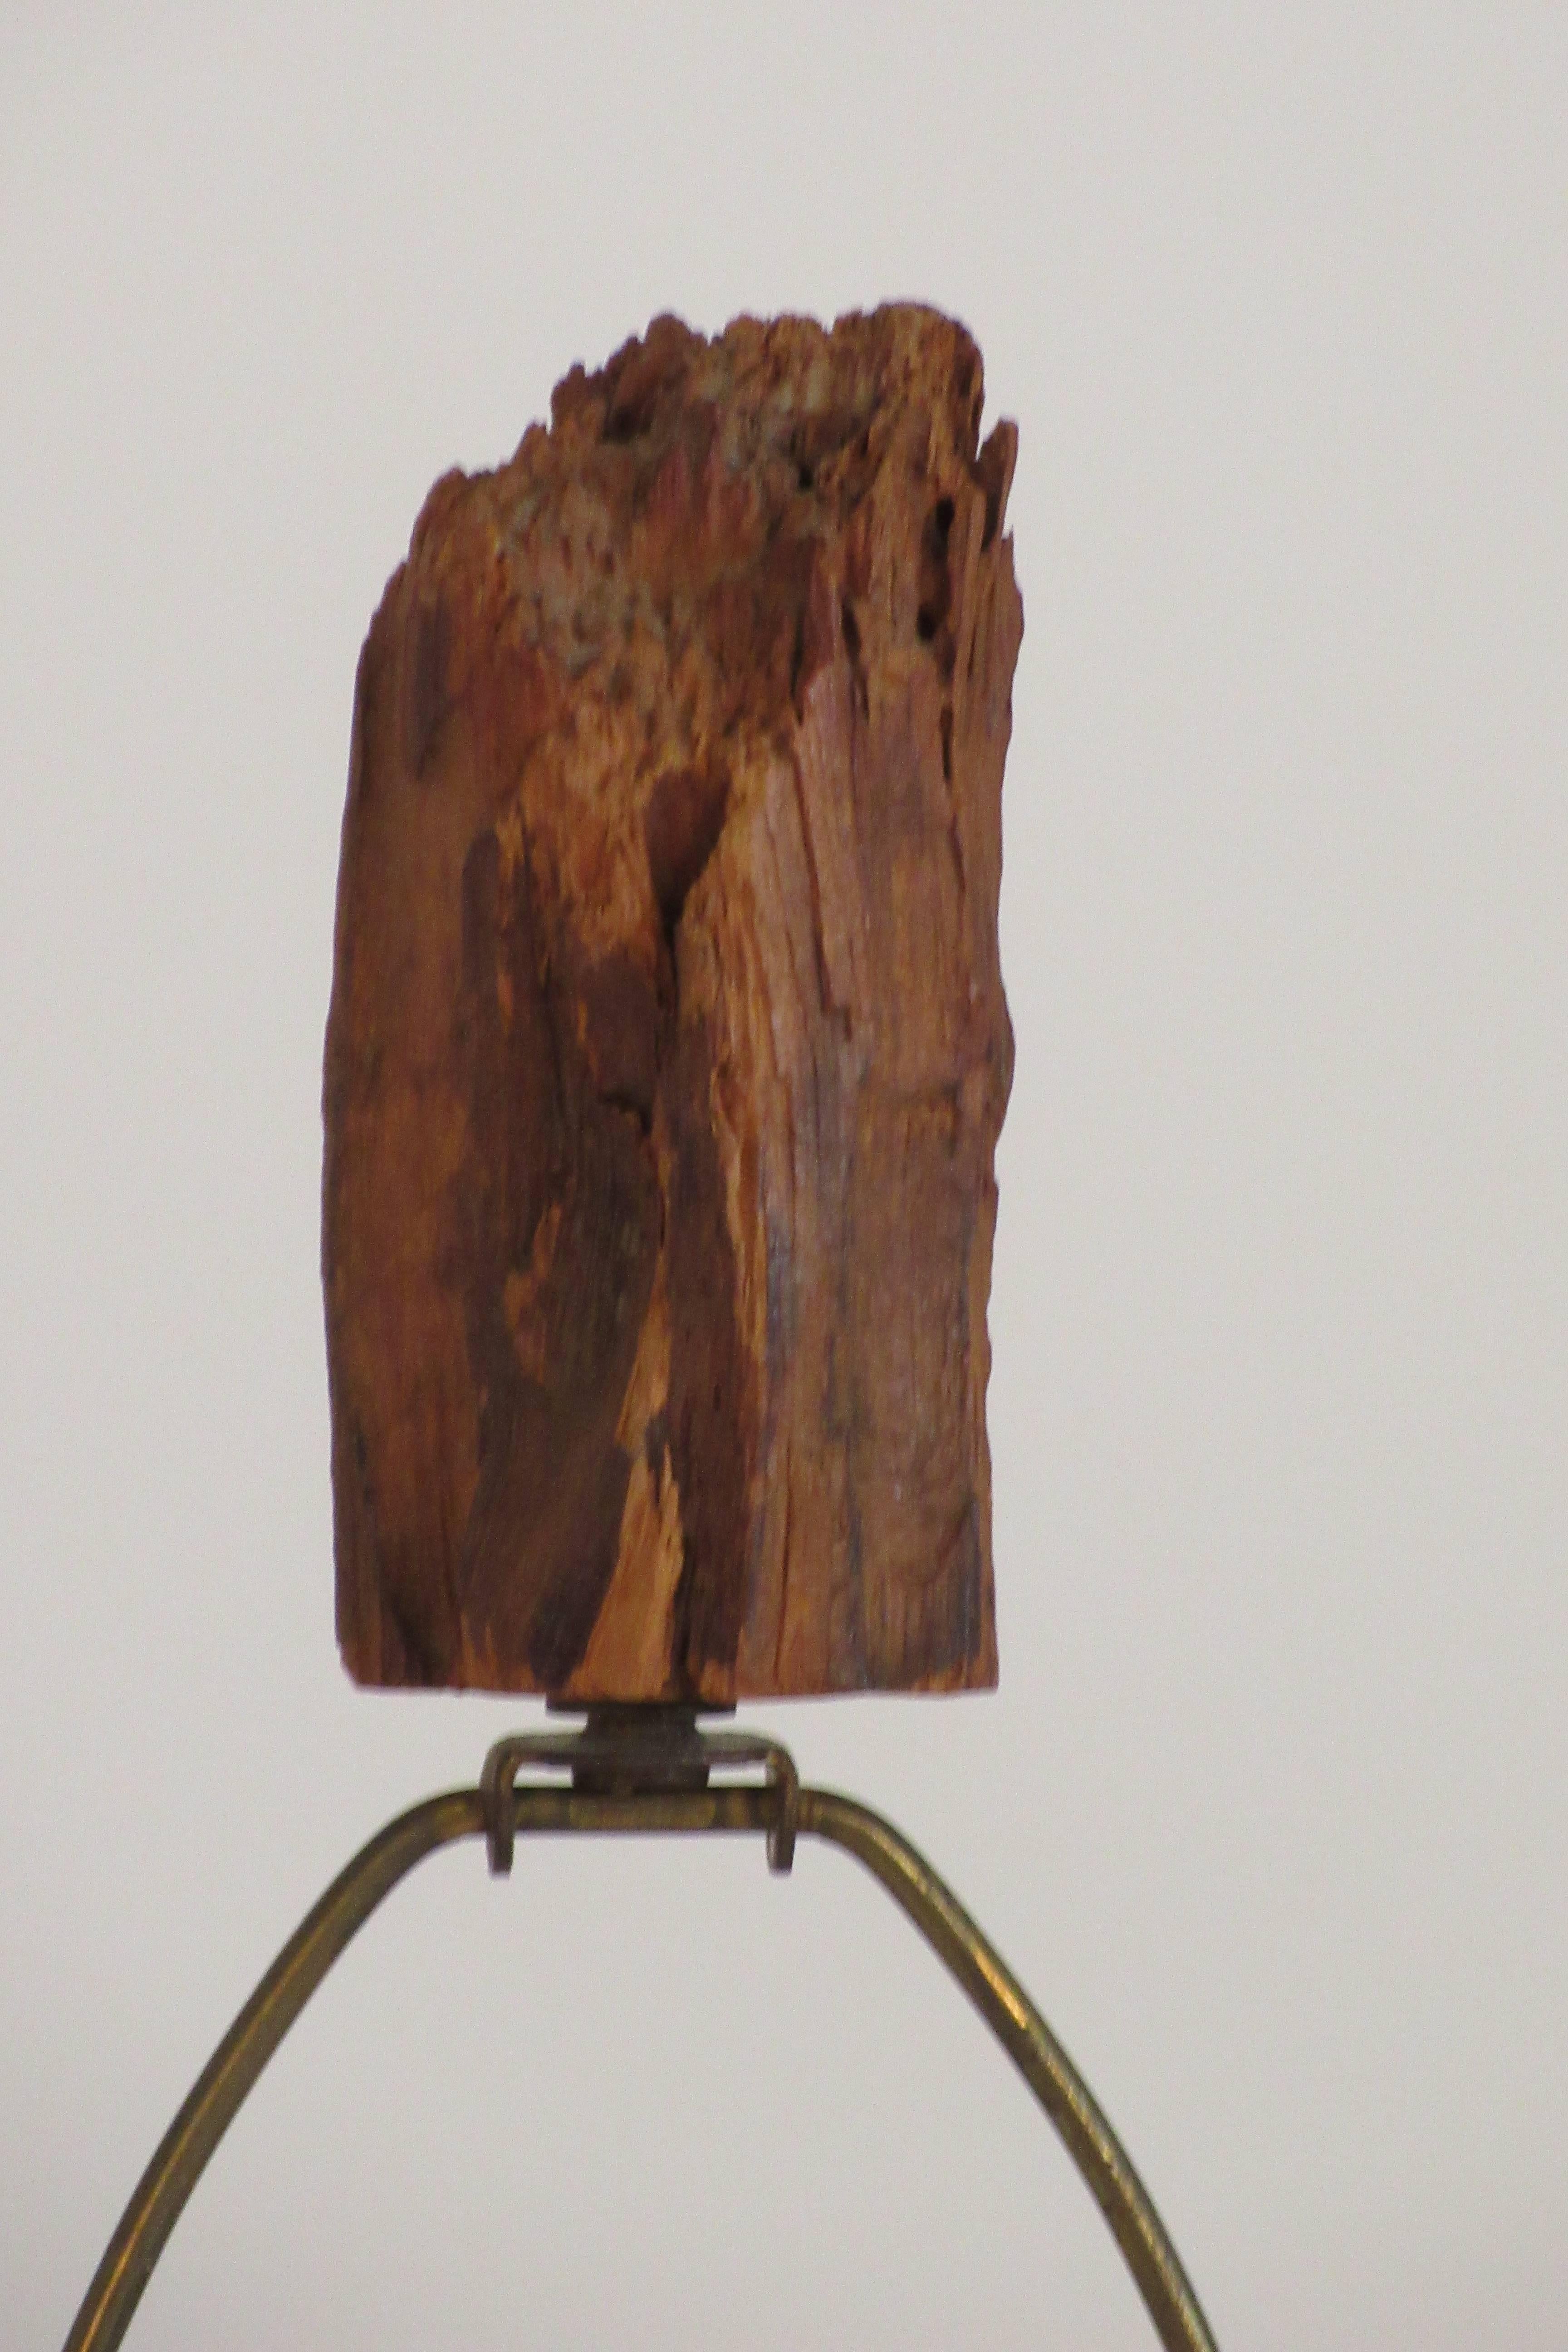 1960s Drift Wood Lamp with Final For Sale 4